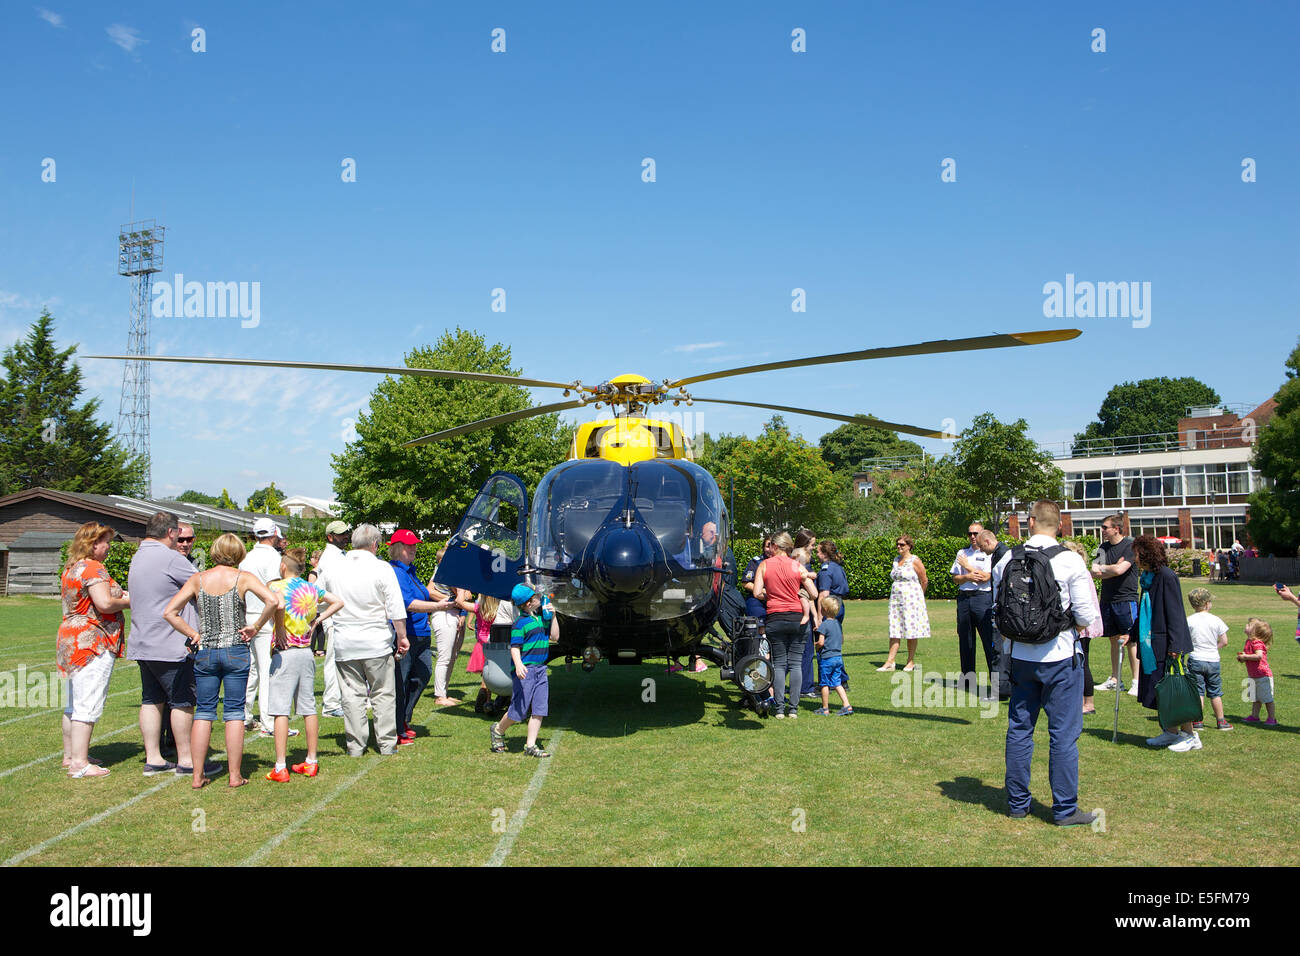 Imber Court police sports club, Ember Road, East Molesey, Surrey, UK. 29th July, 2014.  the Metropolitan Police helicopter (twin engine EC145 Eurocopter) lands as part of the entertainment for visitors to the Howorth Trophy day. This is a cricket match played by teams from different Metropolitan police departments and stations in commemoration of the death of Ken Howorth (GM - George Medal).  Ken was a bomb disposal officer killed whilst diffusing an IRA bomb in central London in 1981. Credit:  Emma Durnford/Alamy Live News Stock Photo